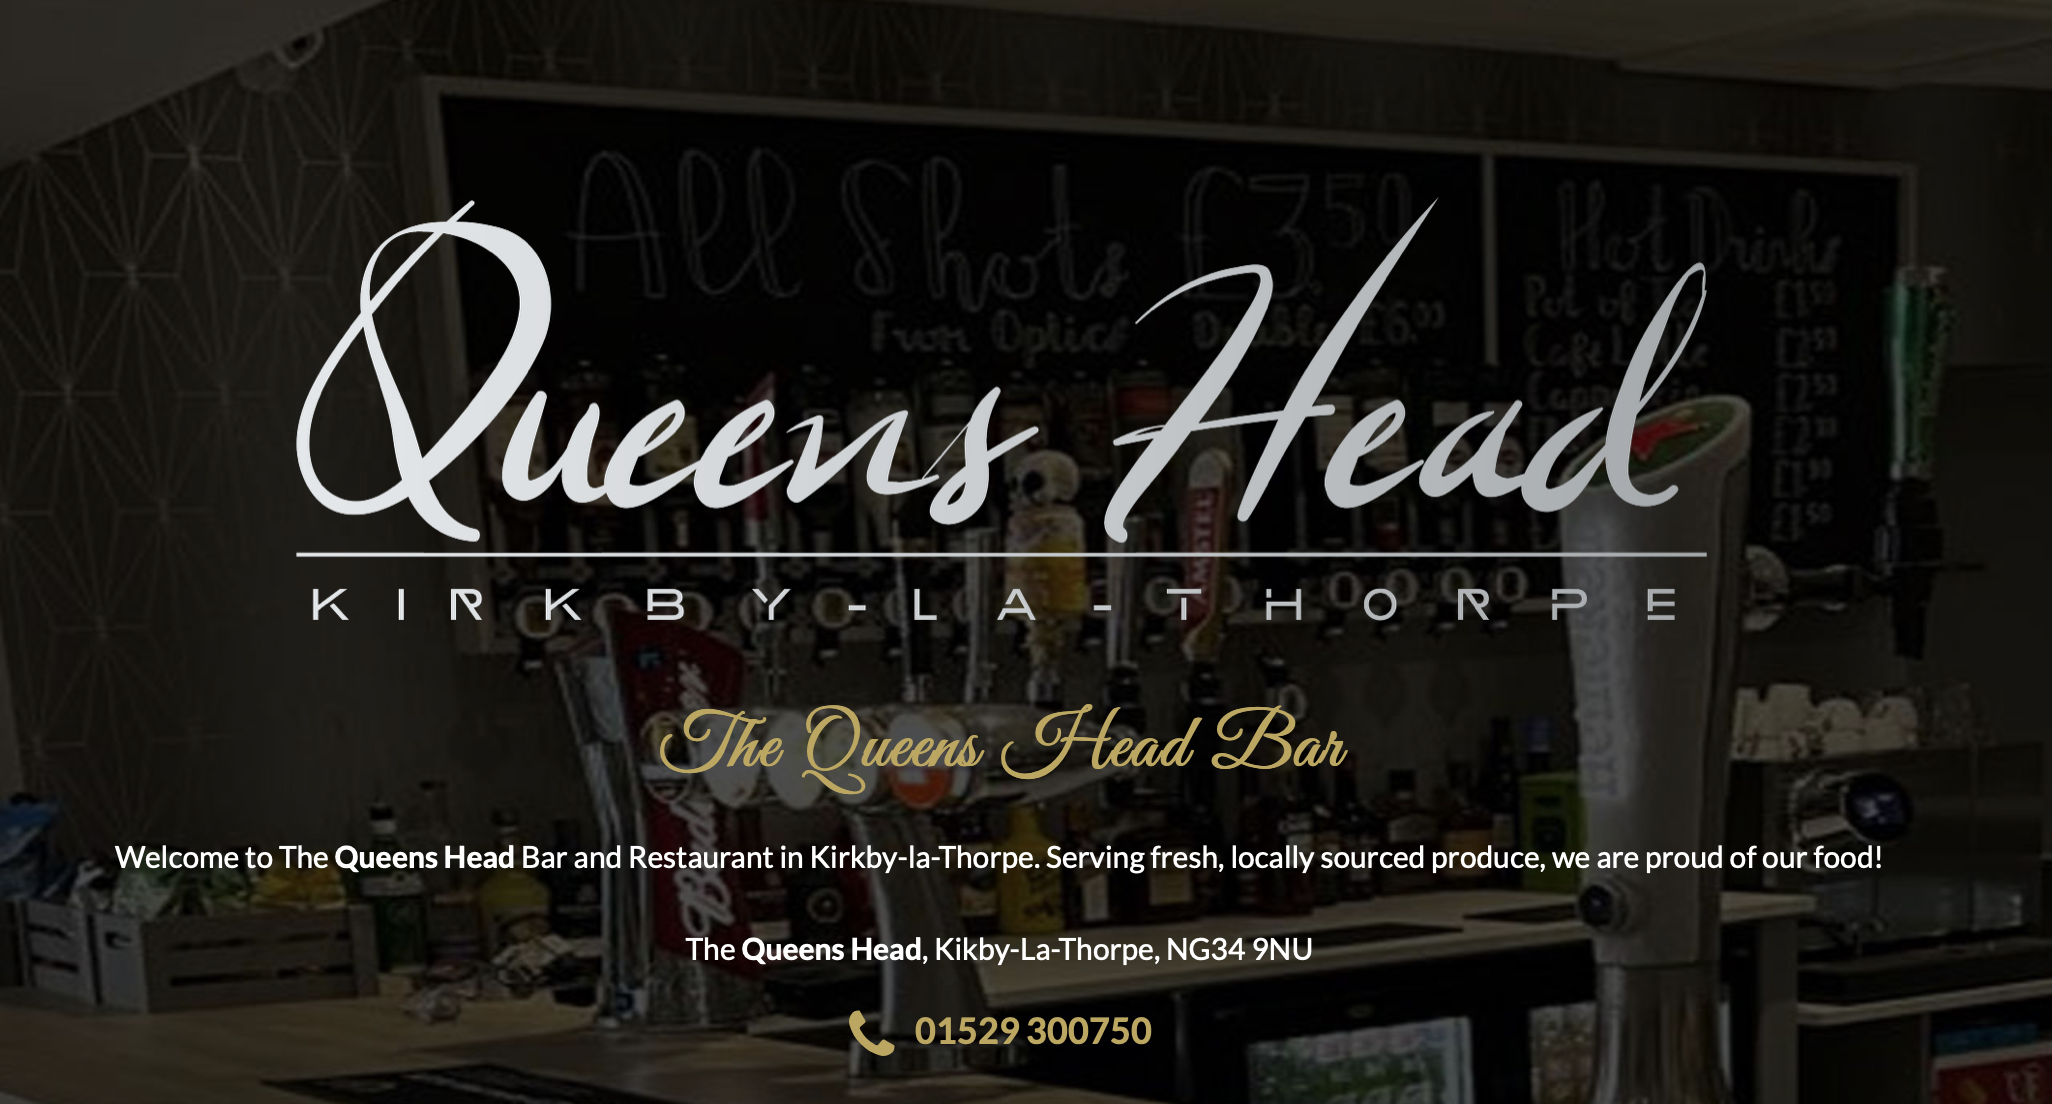 The Queens Head bar and restaurant, Lincolnshire by LincsConnect the Lincolnshire blogger LincsBlogger